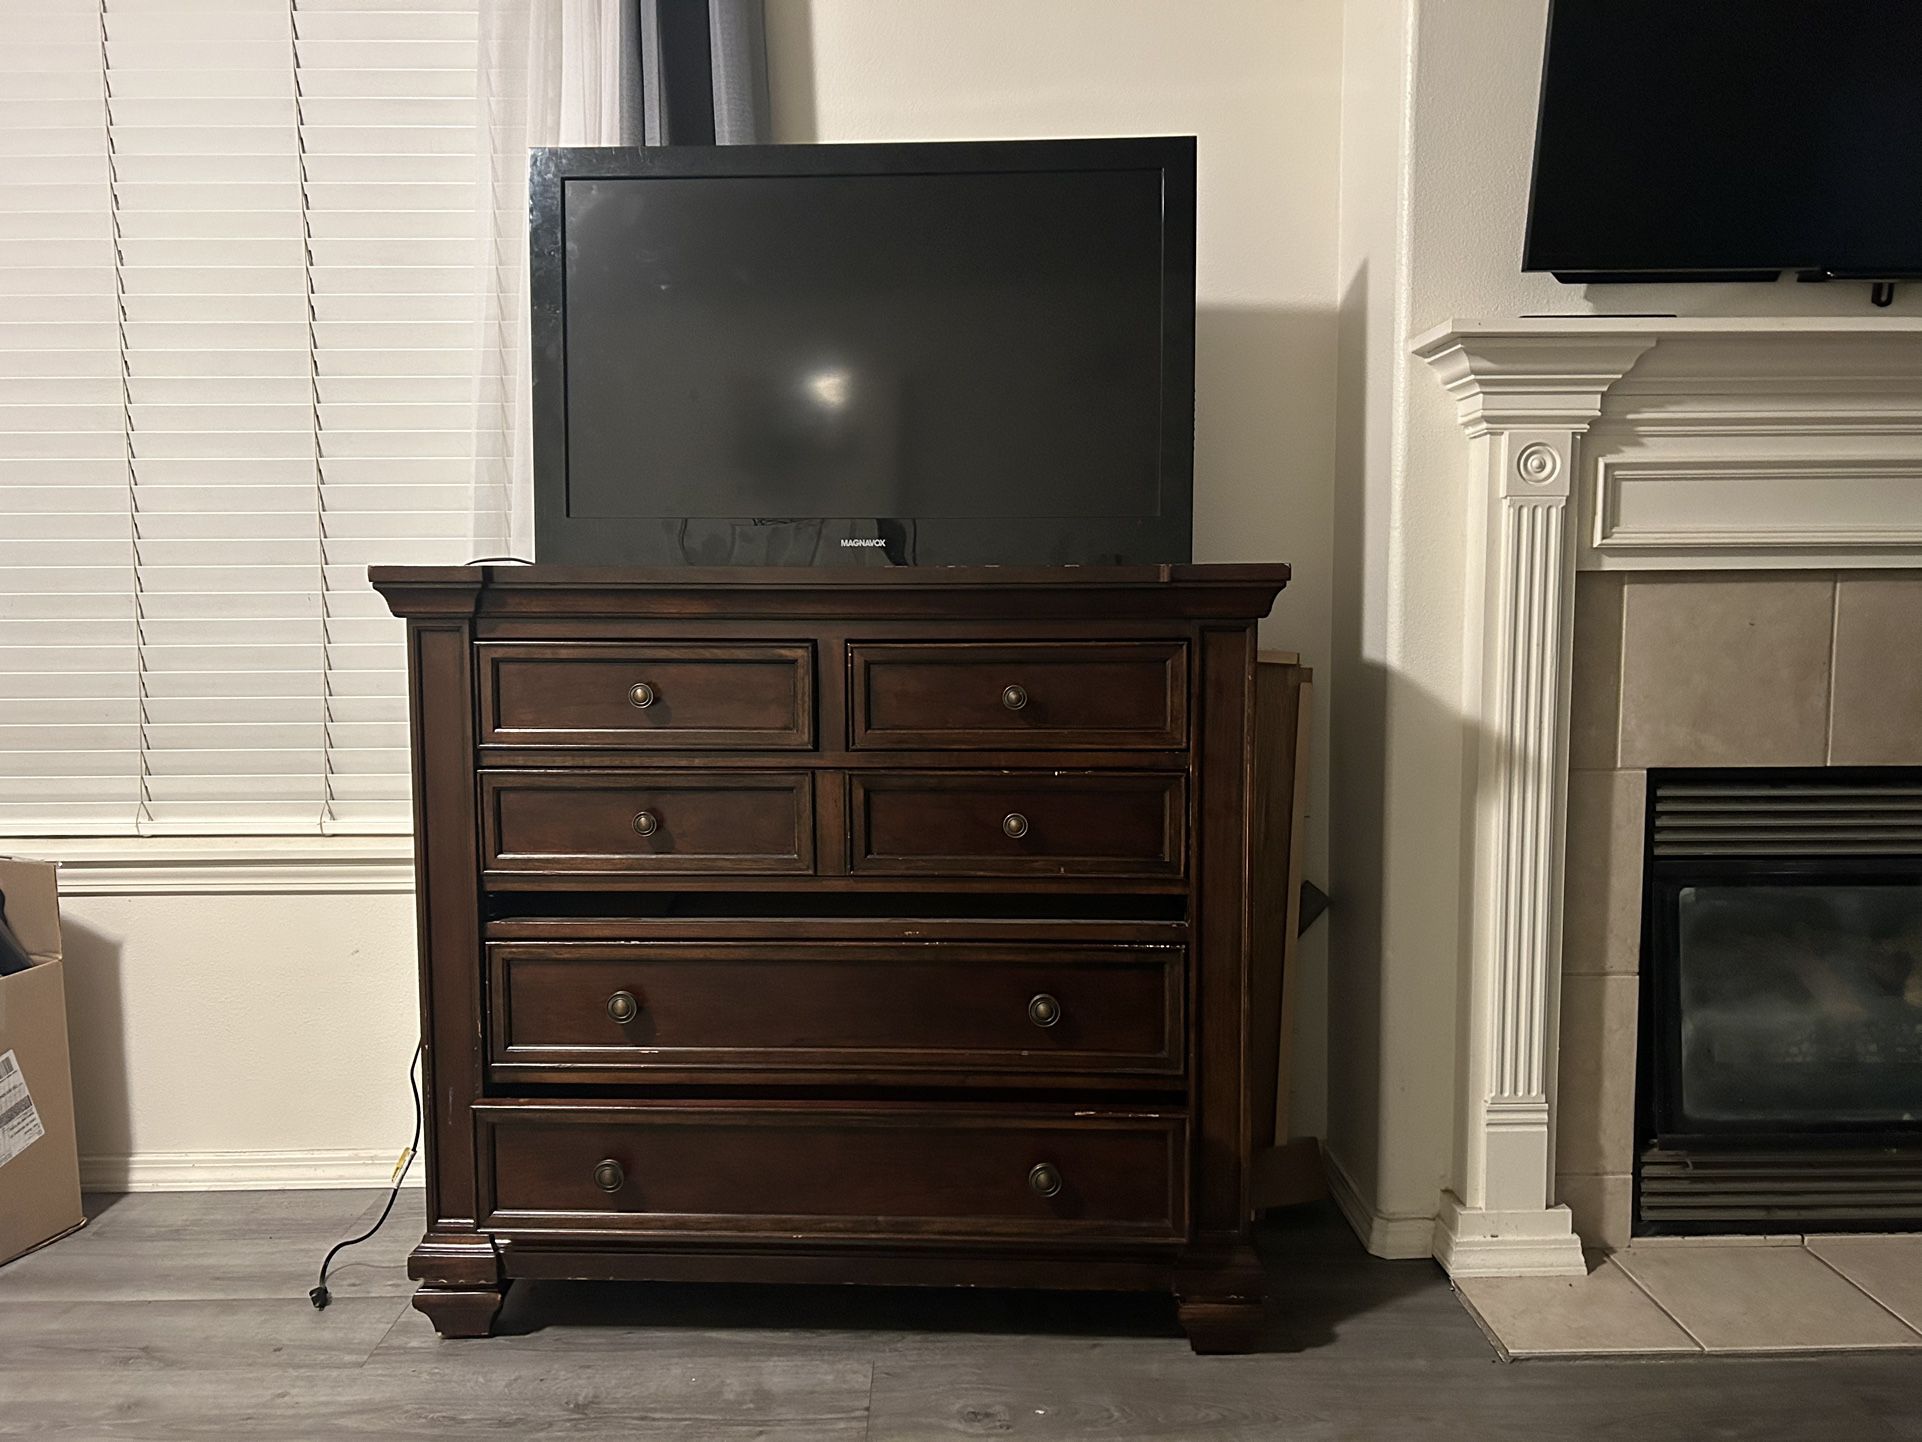 Tv Stand And Dresser 5 Drawer all the furniture is made of wood